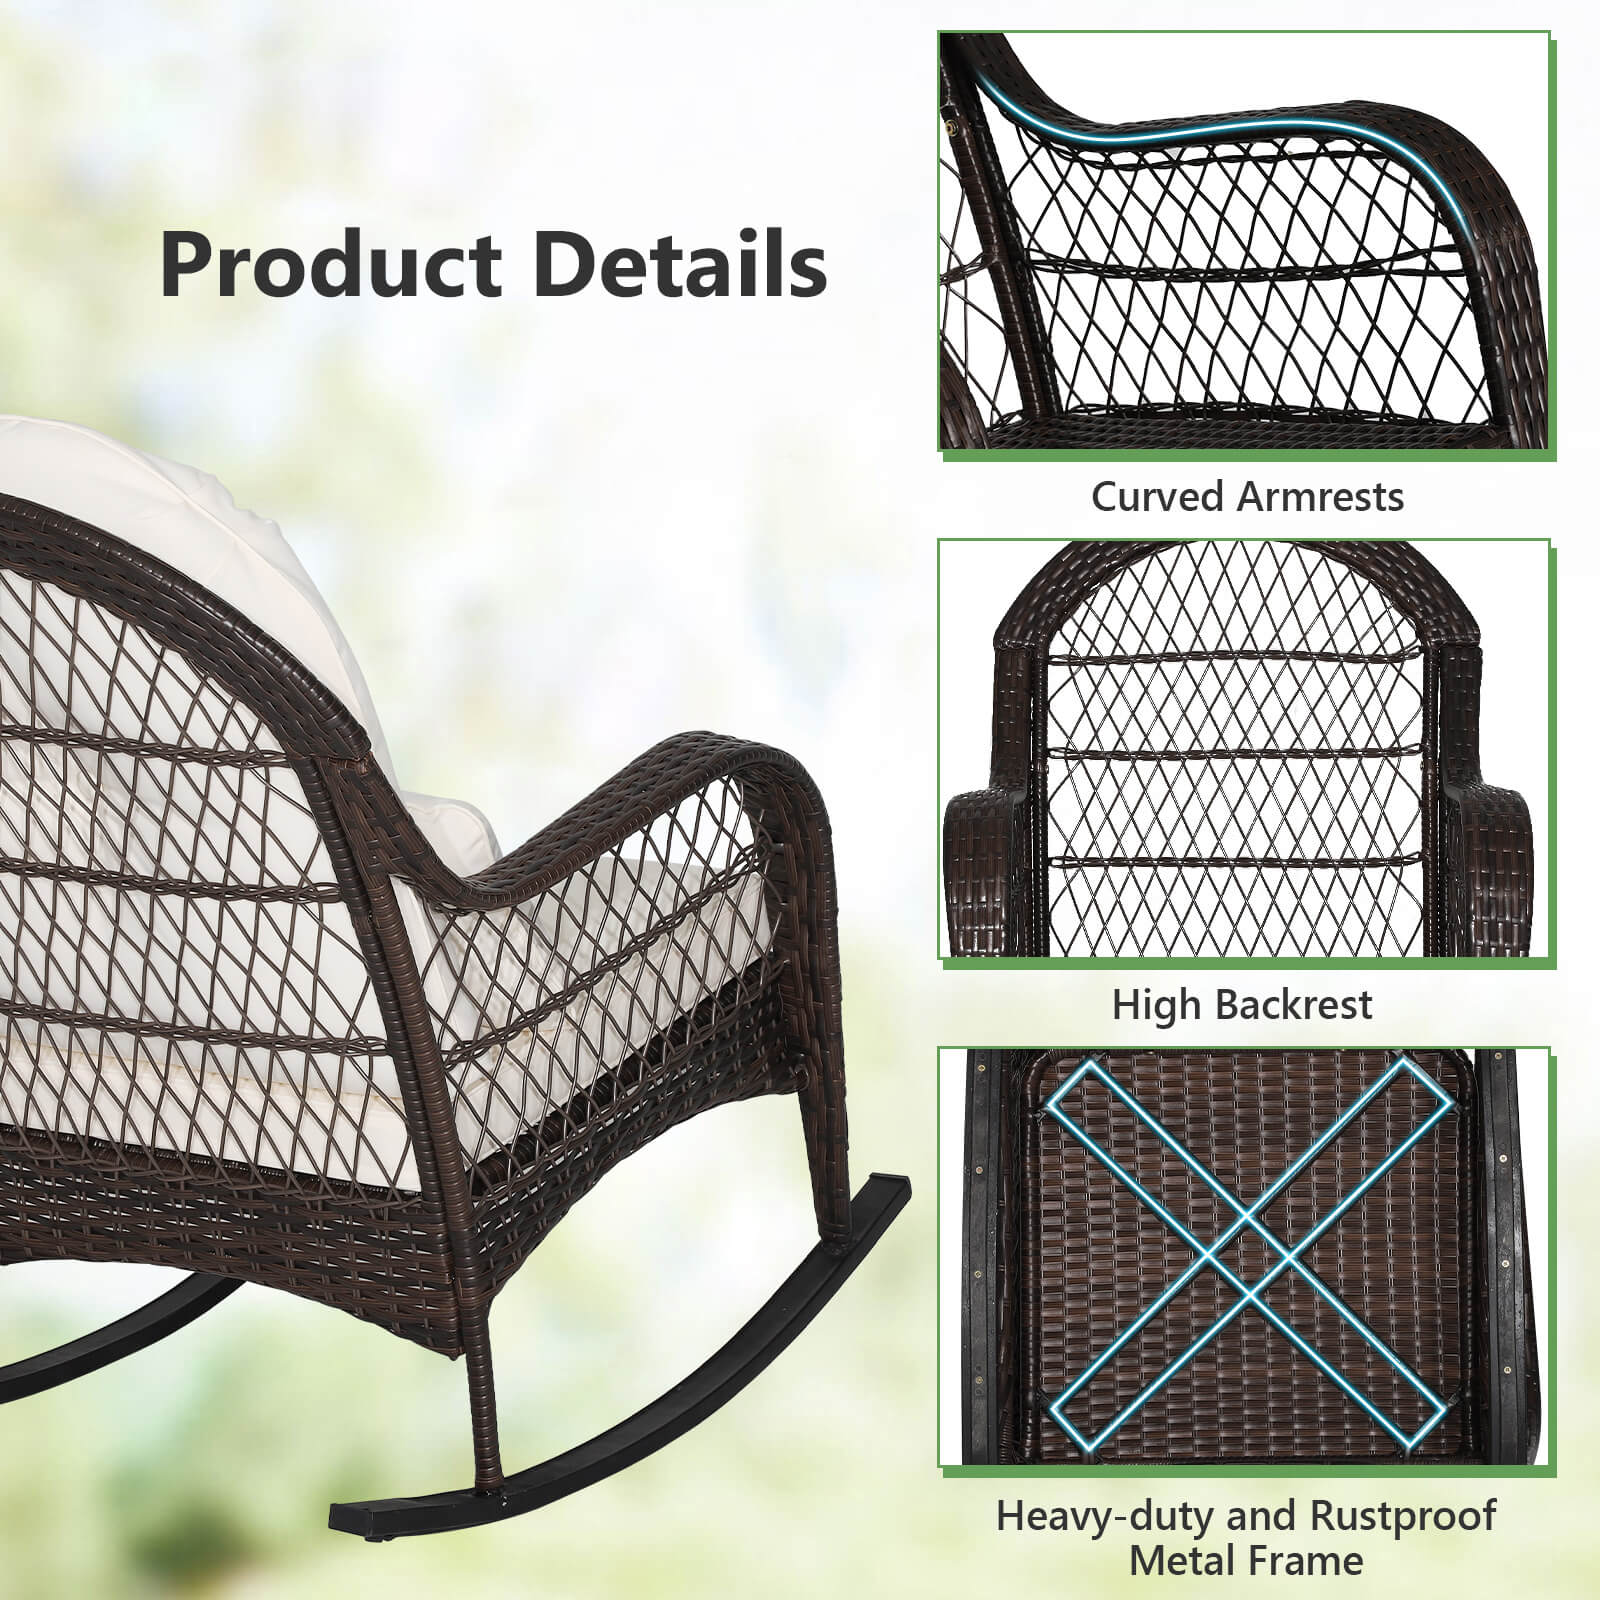 Details_of_the_Patio_Rocking_Chair-9-1.jpg